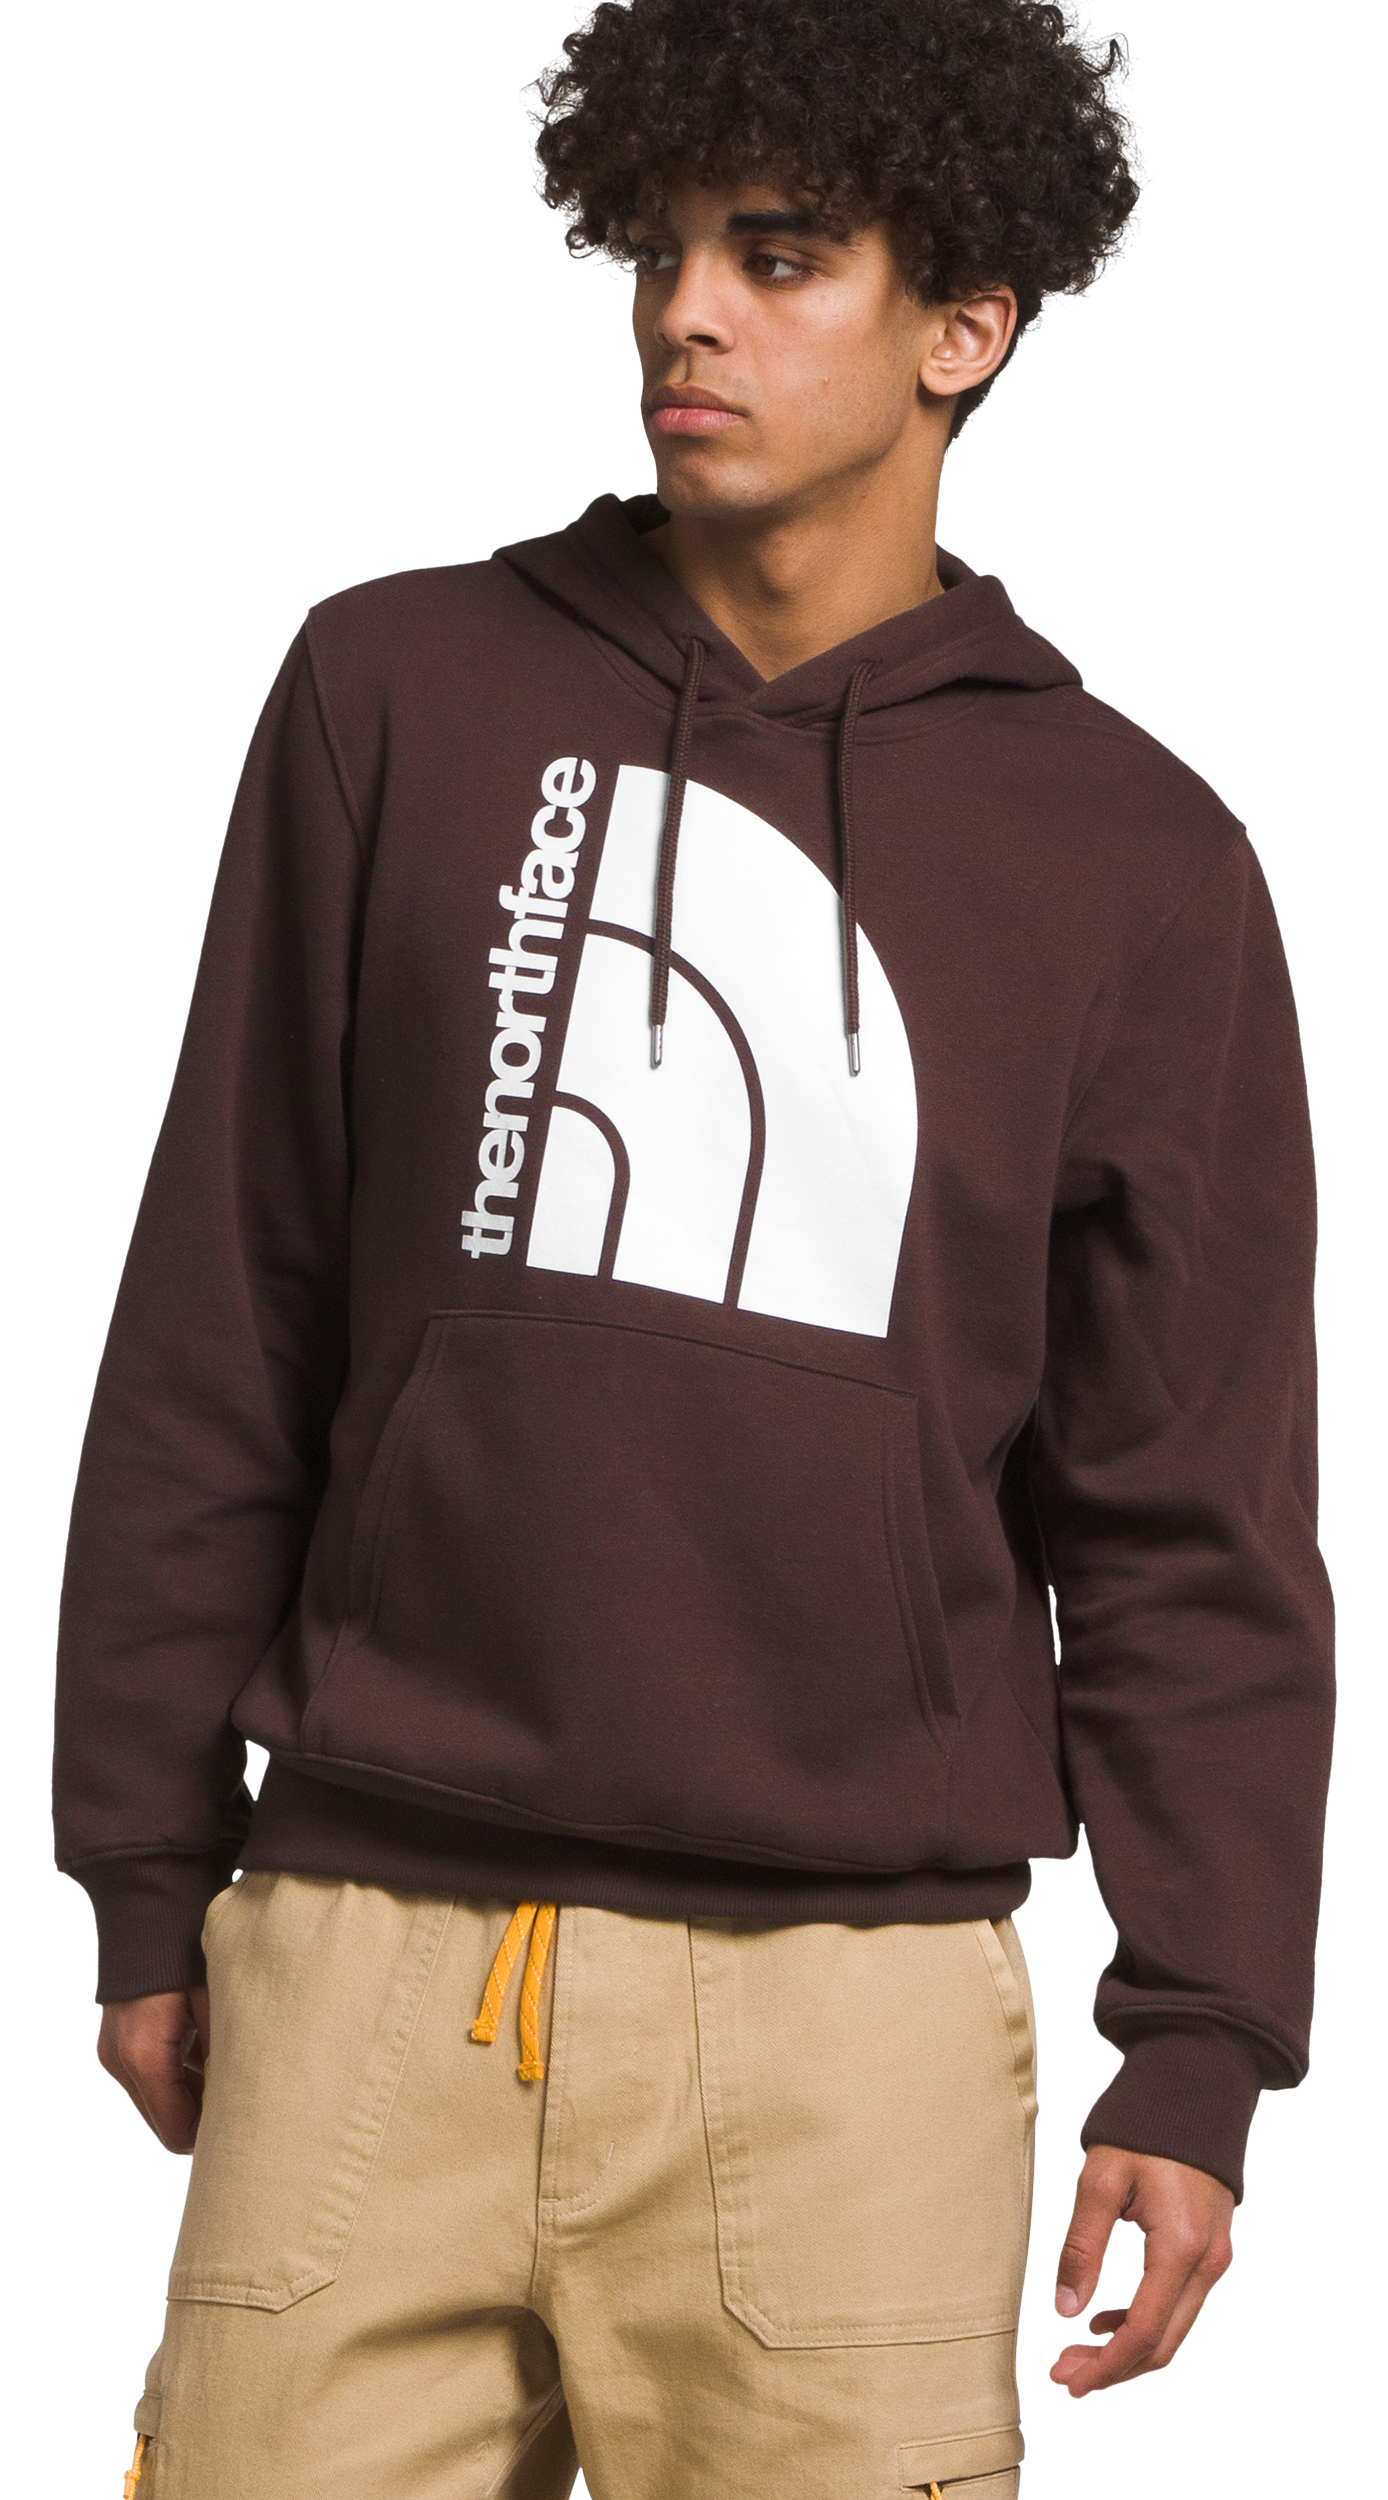 The North Face Jumbo Half Dome Long-Sleeve Hoodie for Men - Coal Brown/TNF White - L